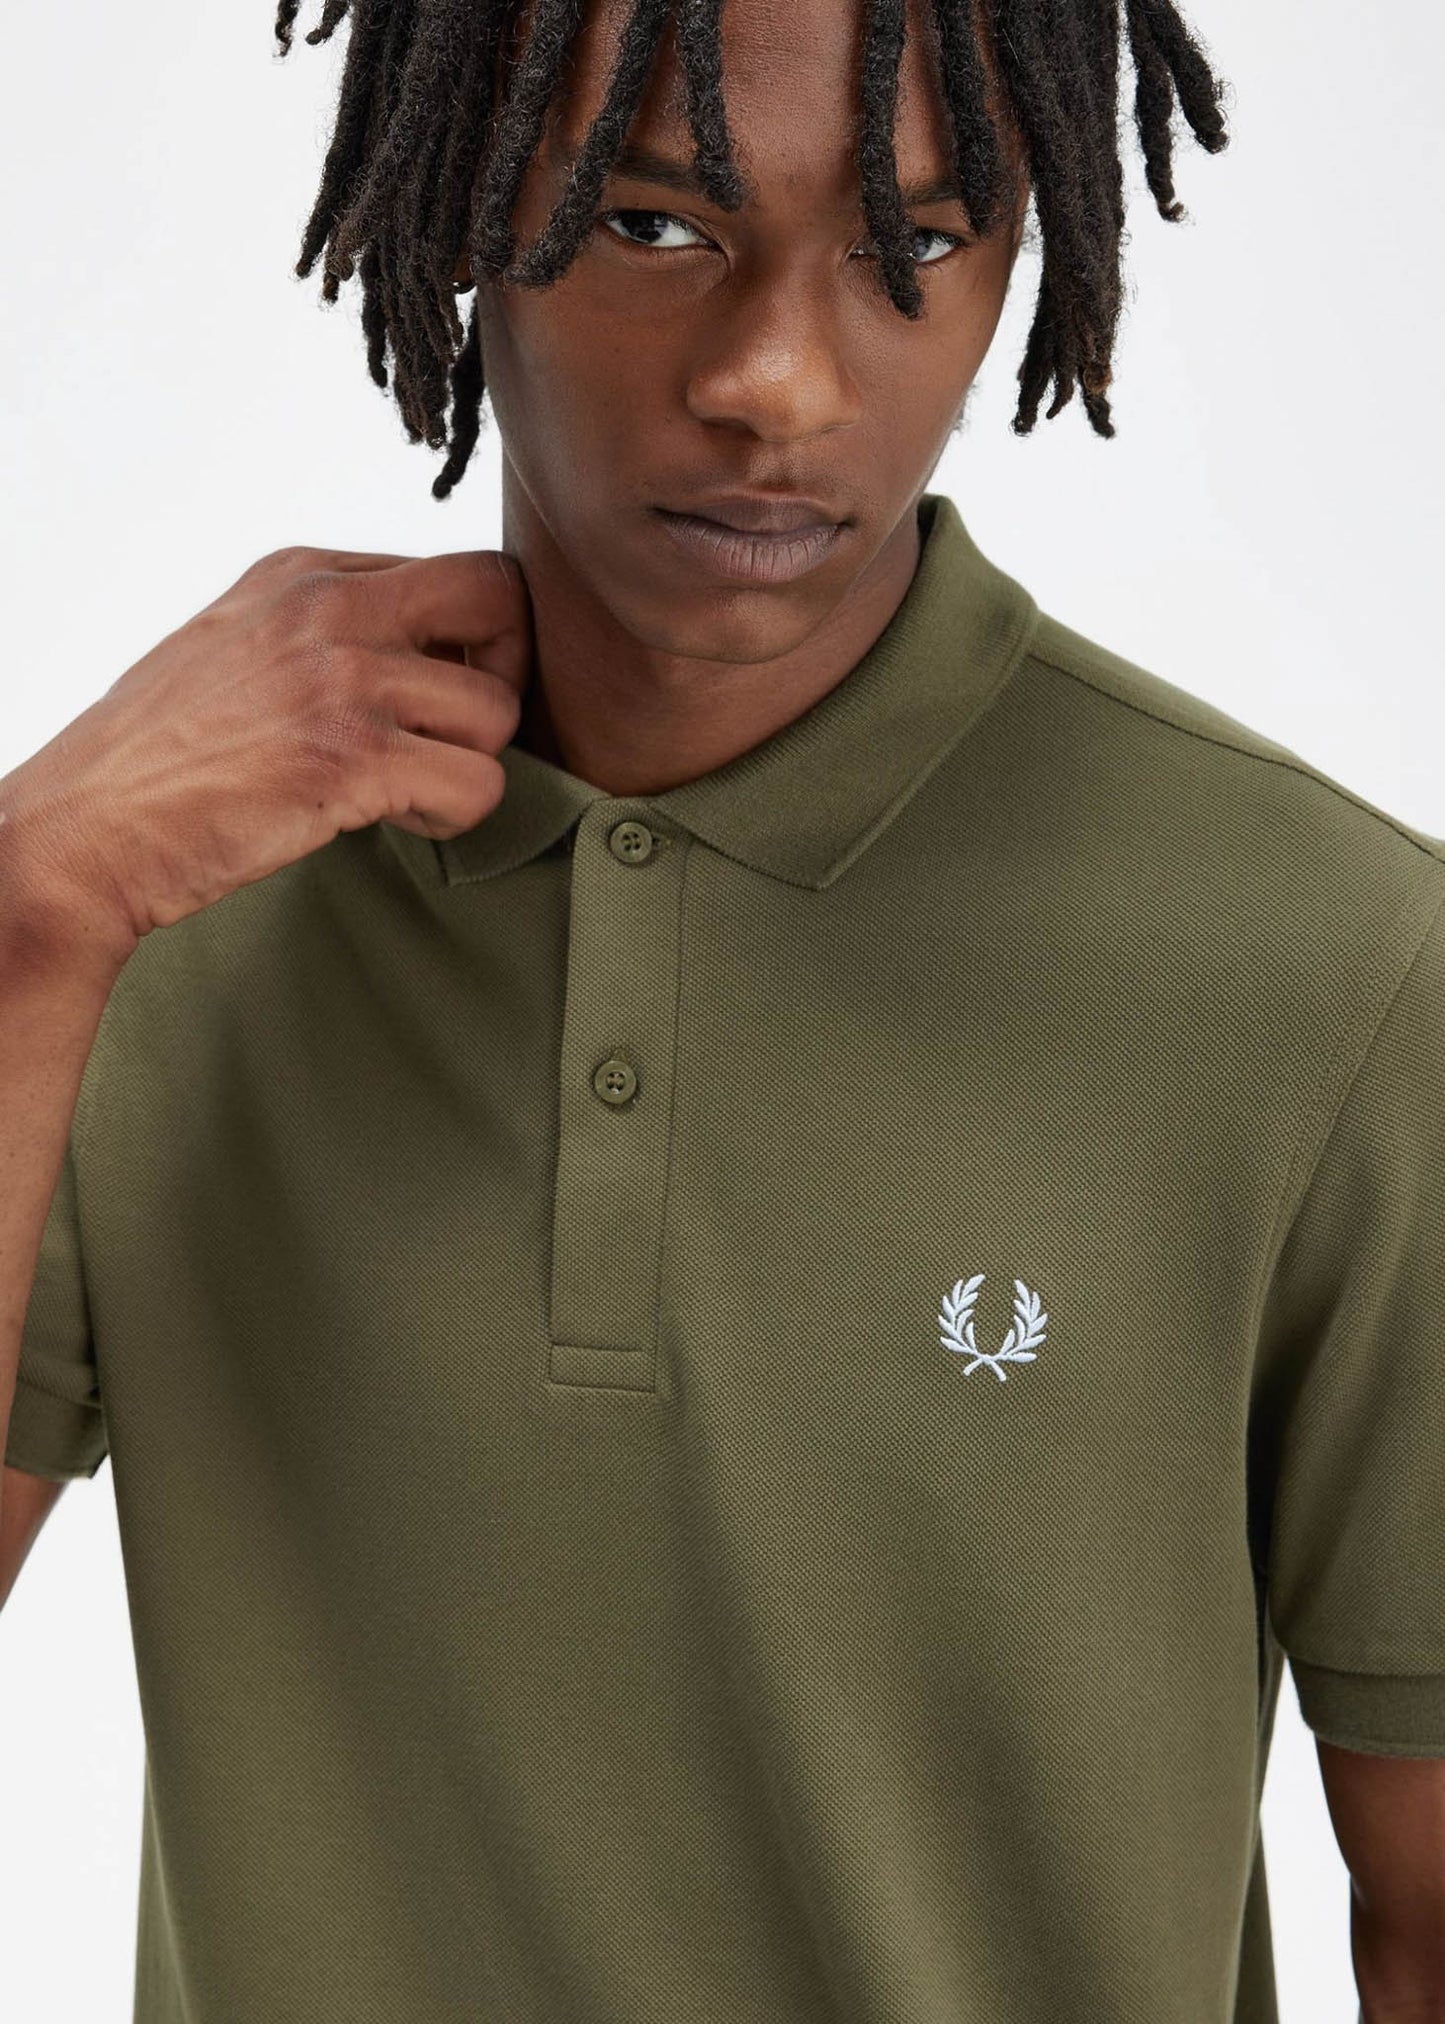 Fred Perry T-shirts  Plain fred perry shirt - unigreen lghtice 